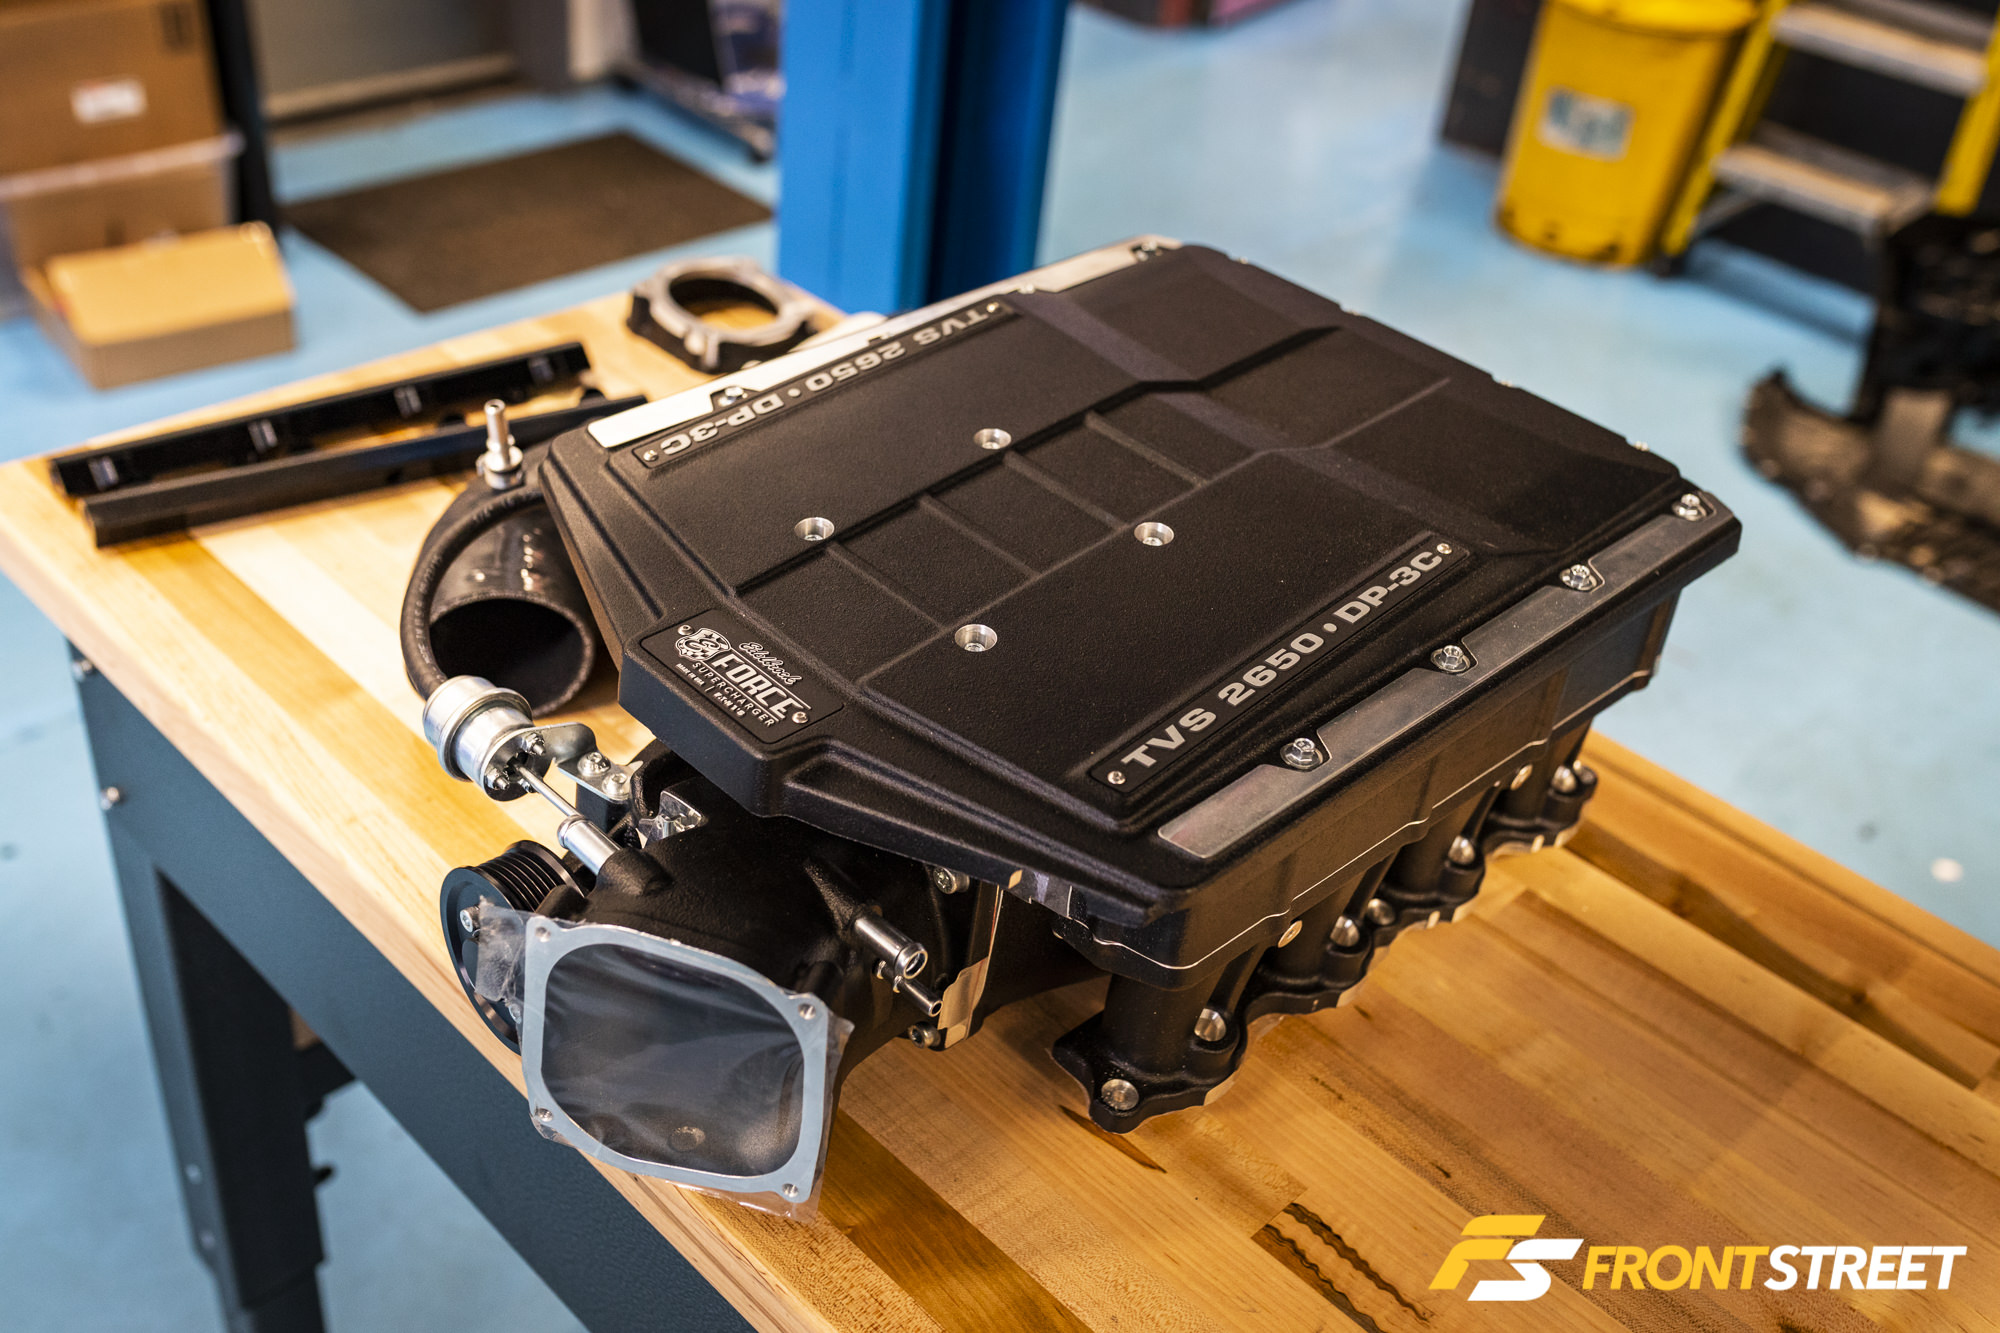 Forcing The Issue: Edelbrock’s E-Force R2650 Supercharger Makes Crazy Power On 2018 Mustang